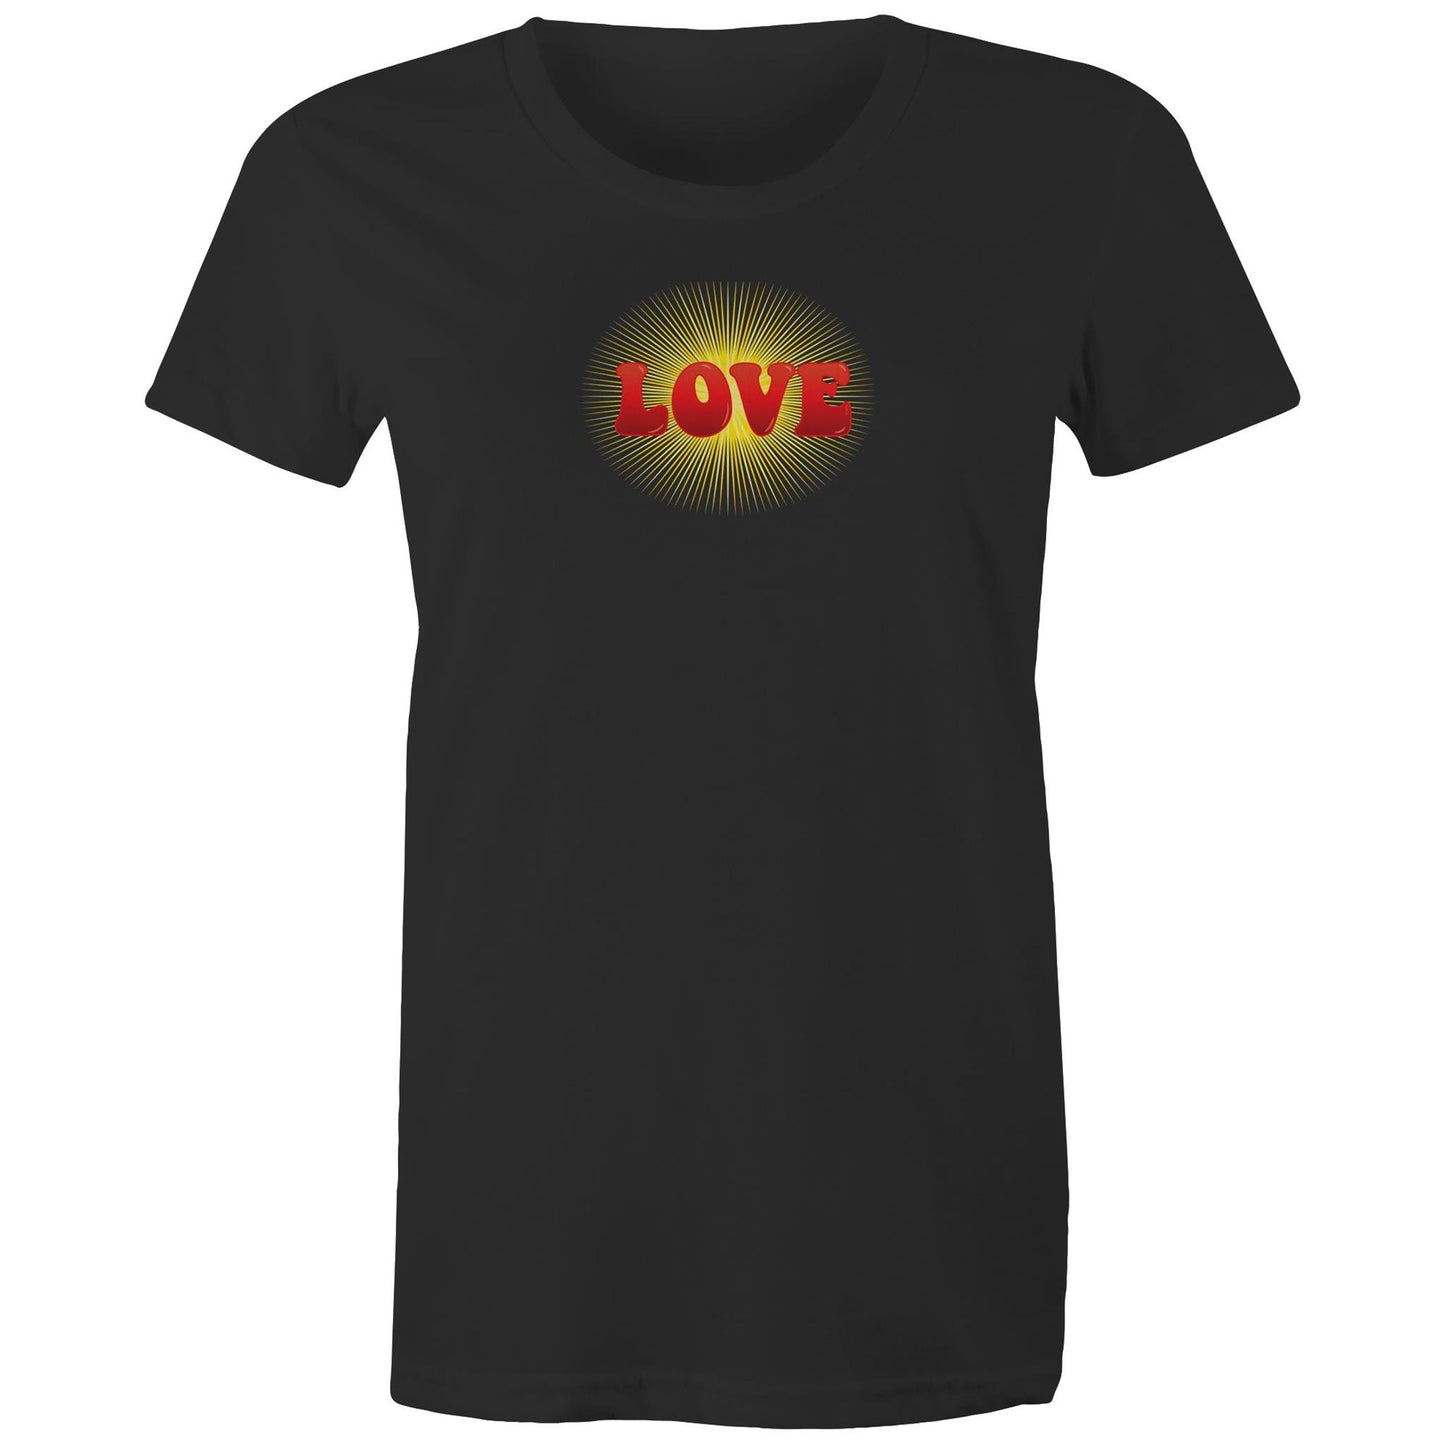 Radiant Love T Shirts for Women